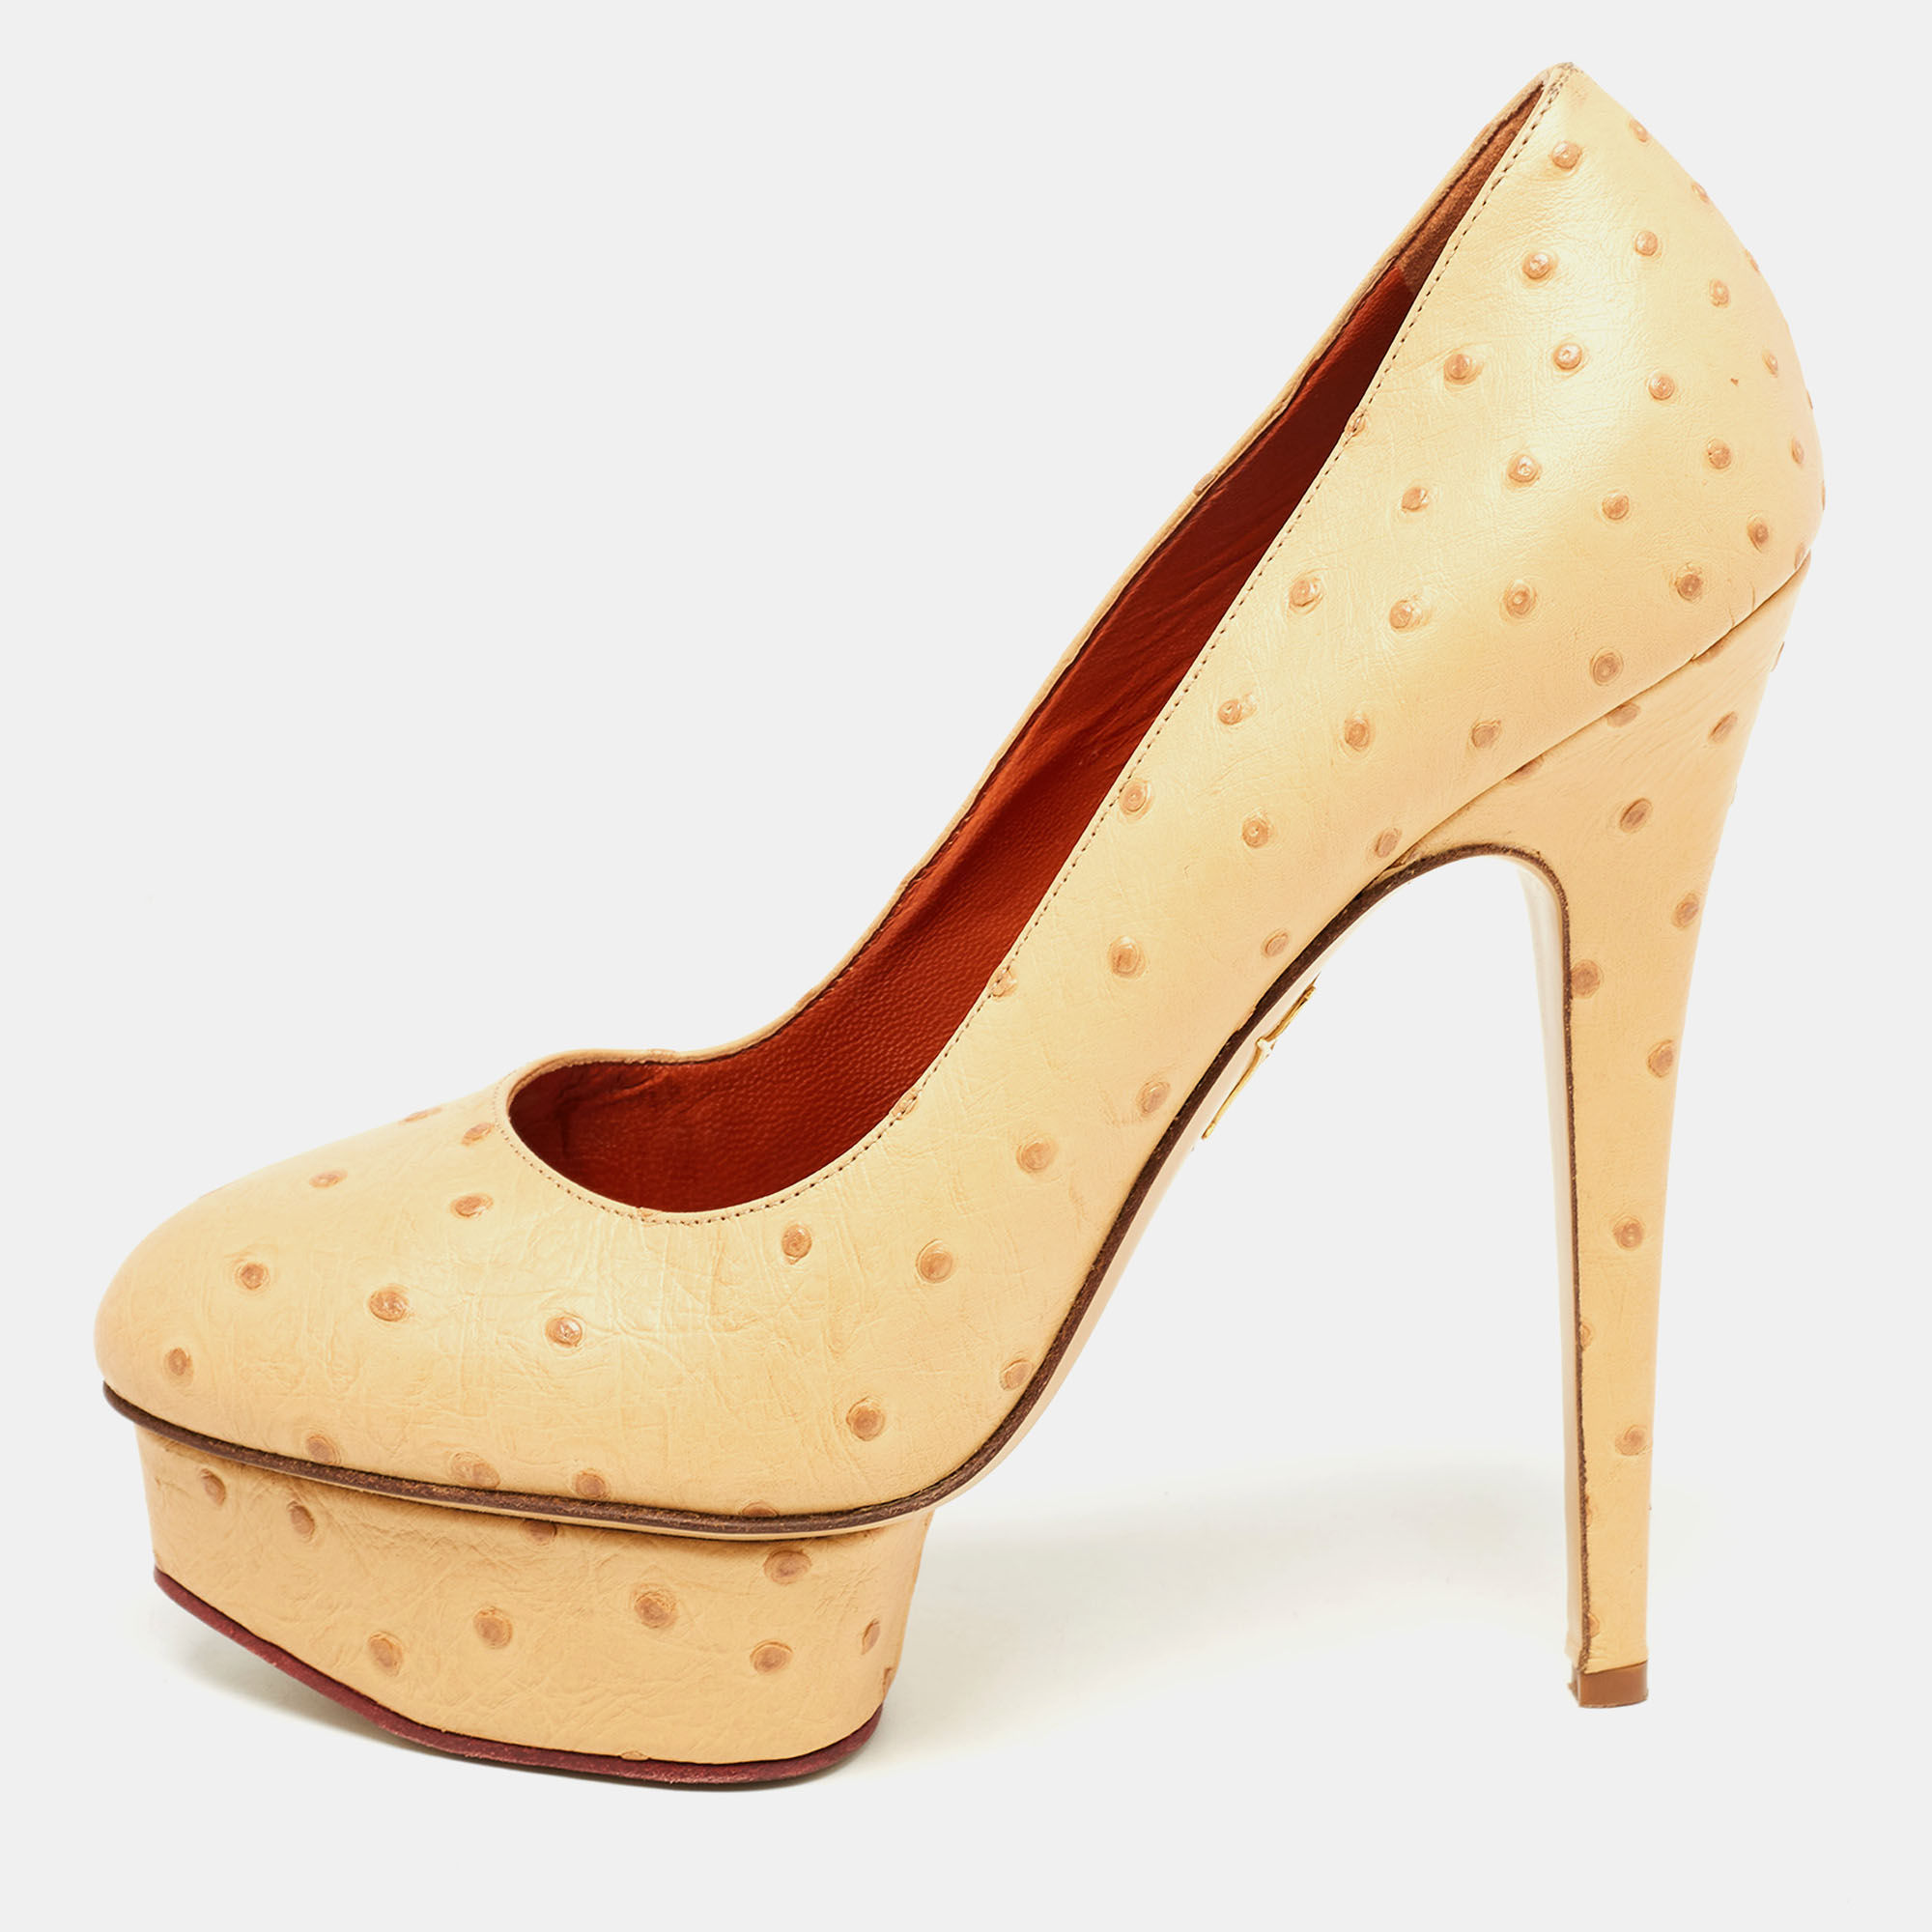 Charlotte olympia beige ostrich leather dolly platform pumps size 40